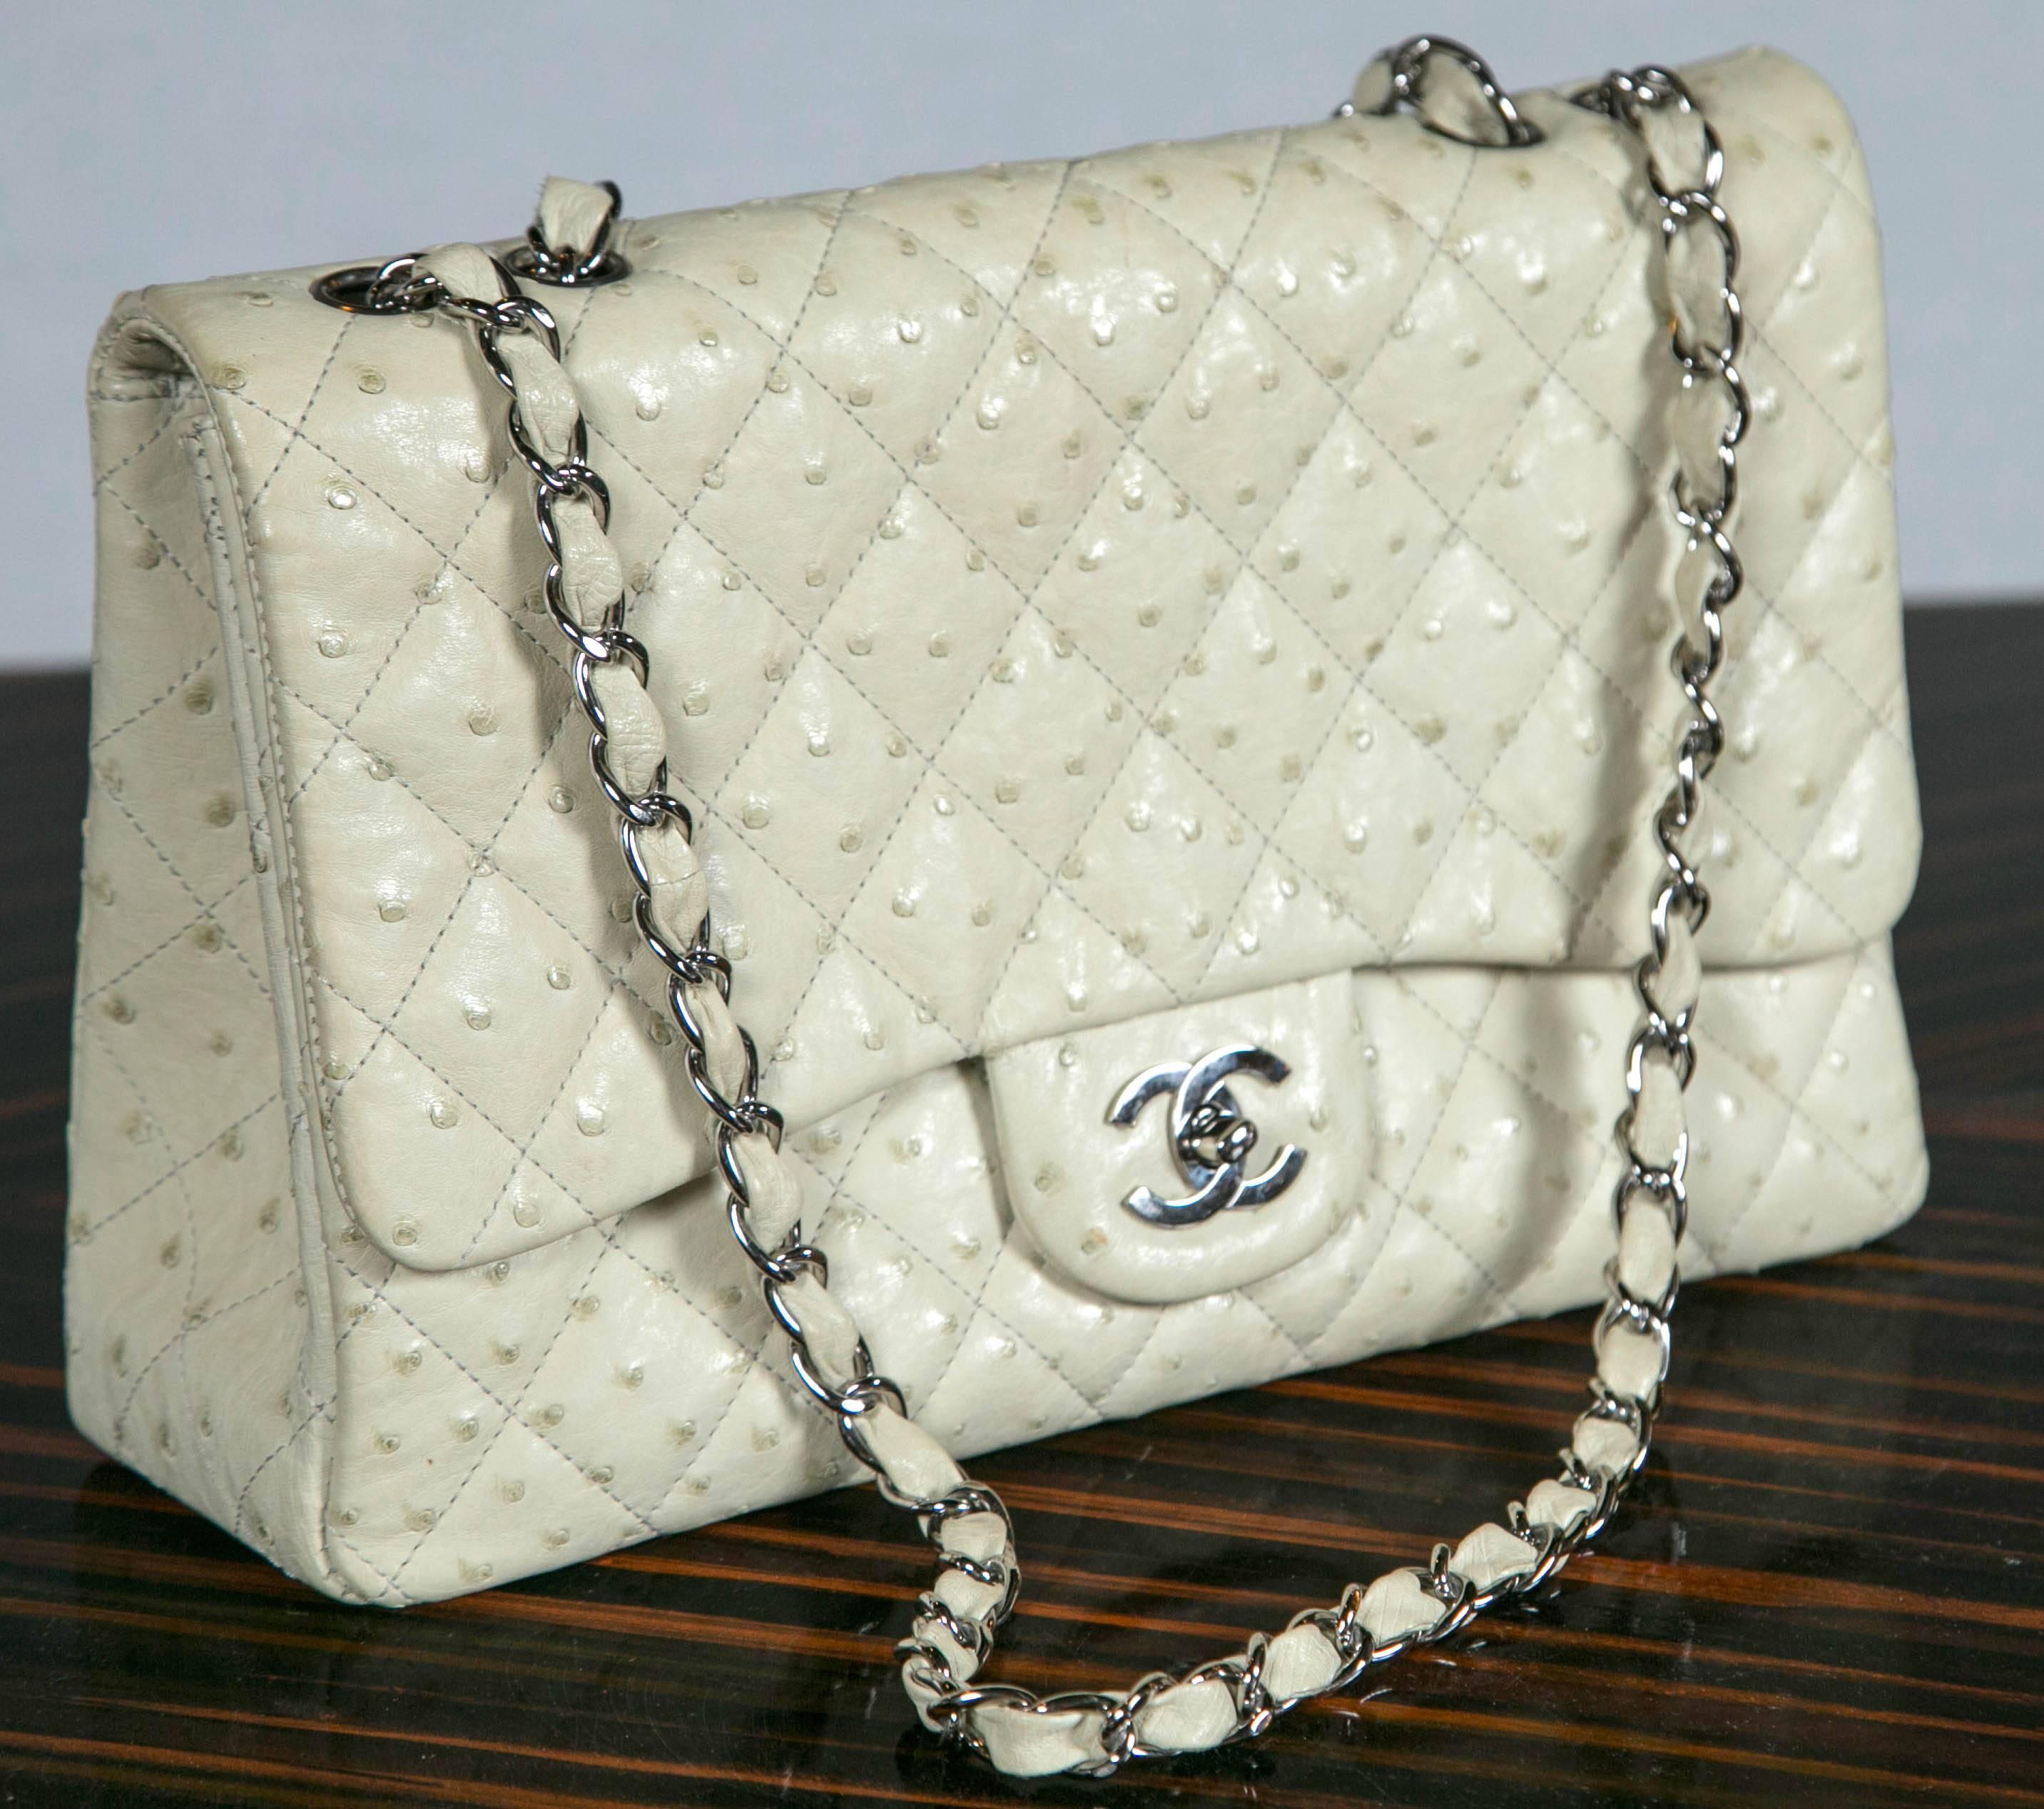 This exotic Chanel is in a luxurious rich beige ostrich skin. Ostrich skin is unmistakable in appearance. It requires a very specialized production process making it quite a bit more expensive than the bovine leathers. Ostrich is considered one of